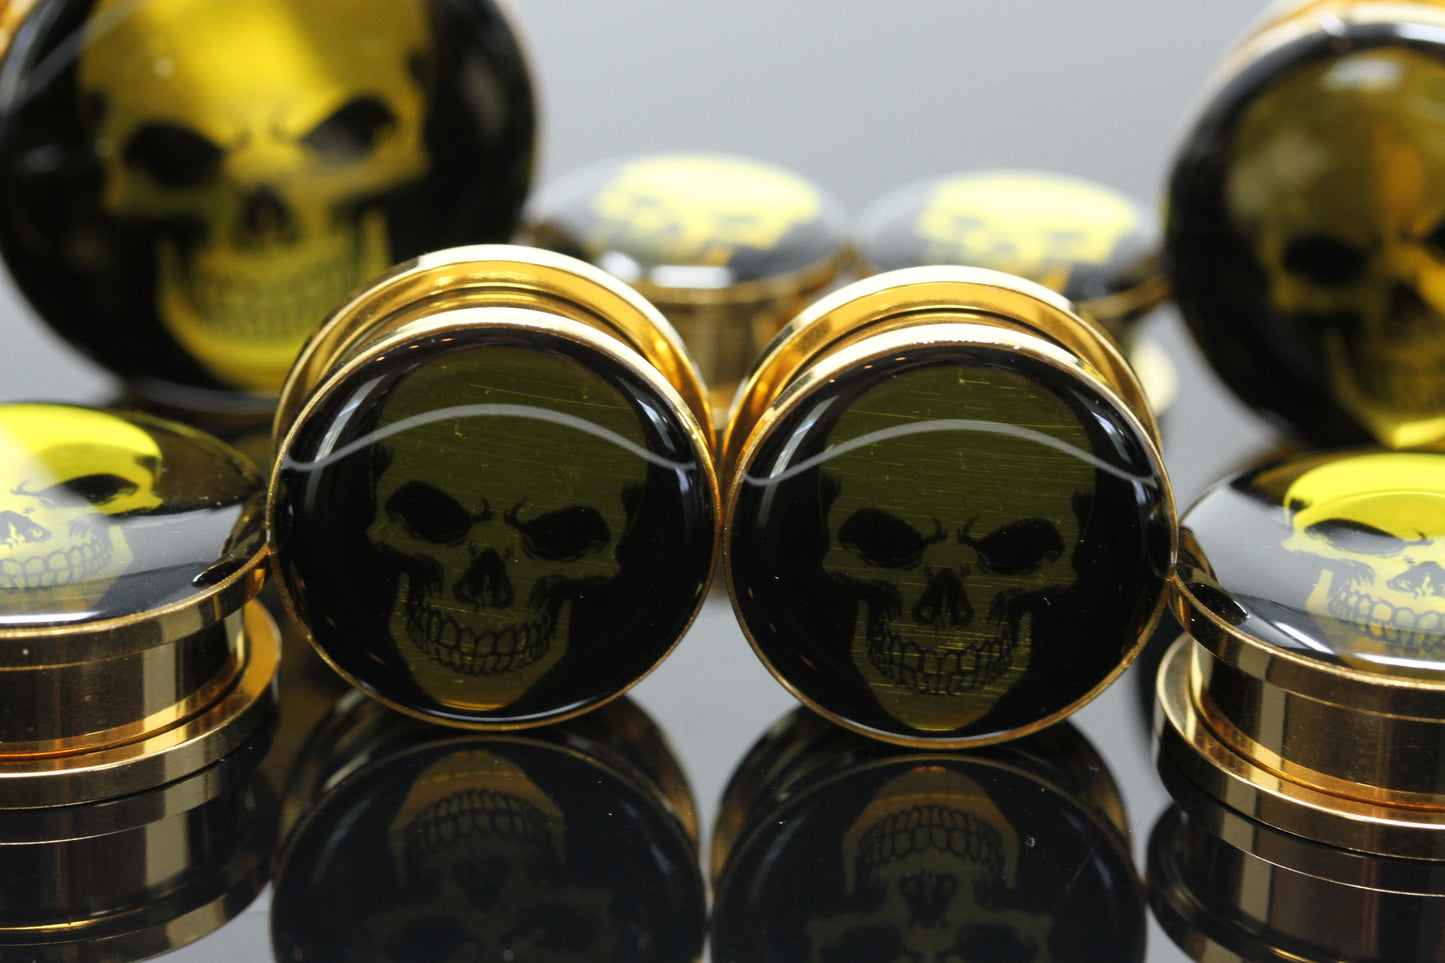 Gold Holo-Skull Stainless Steel Plugs (Pair) - PSS89